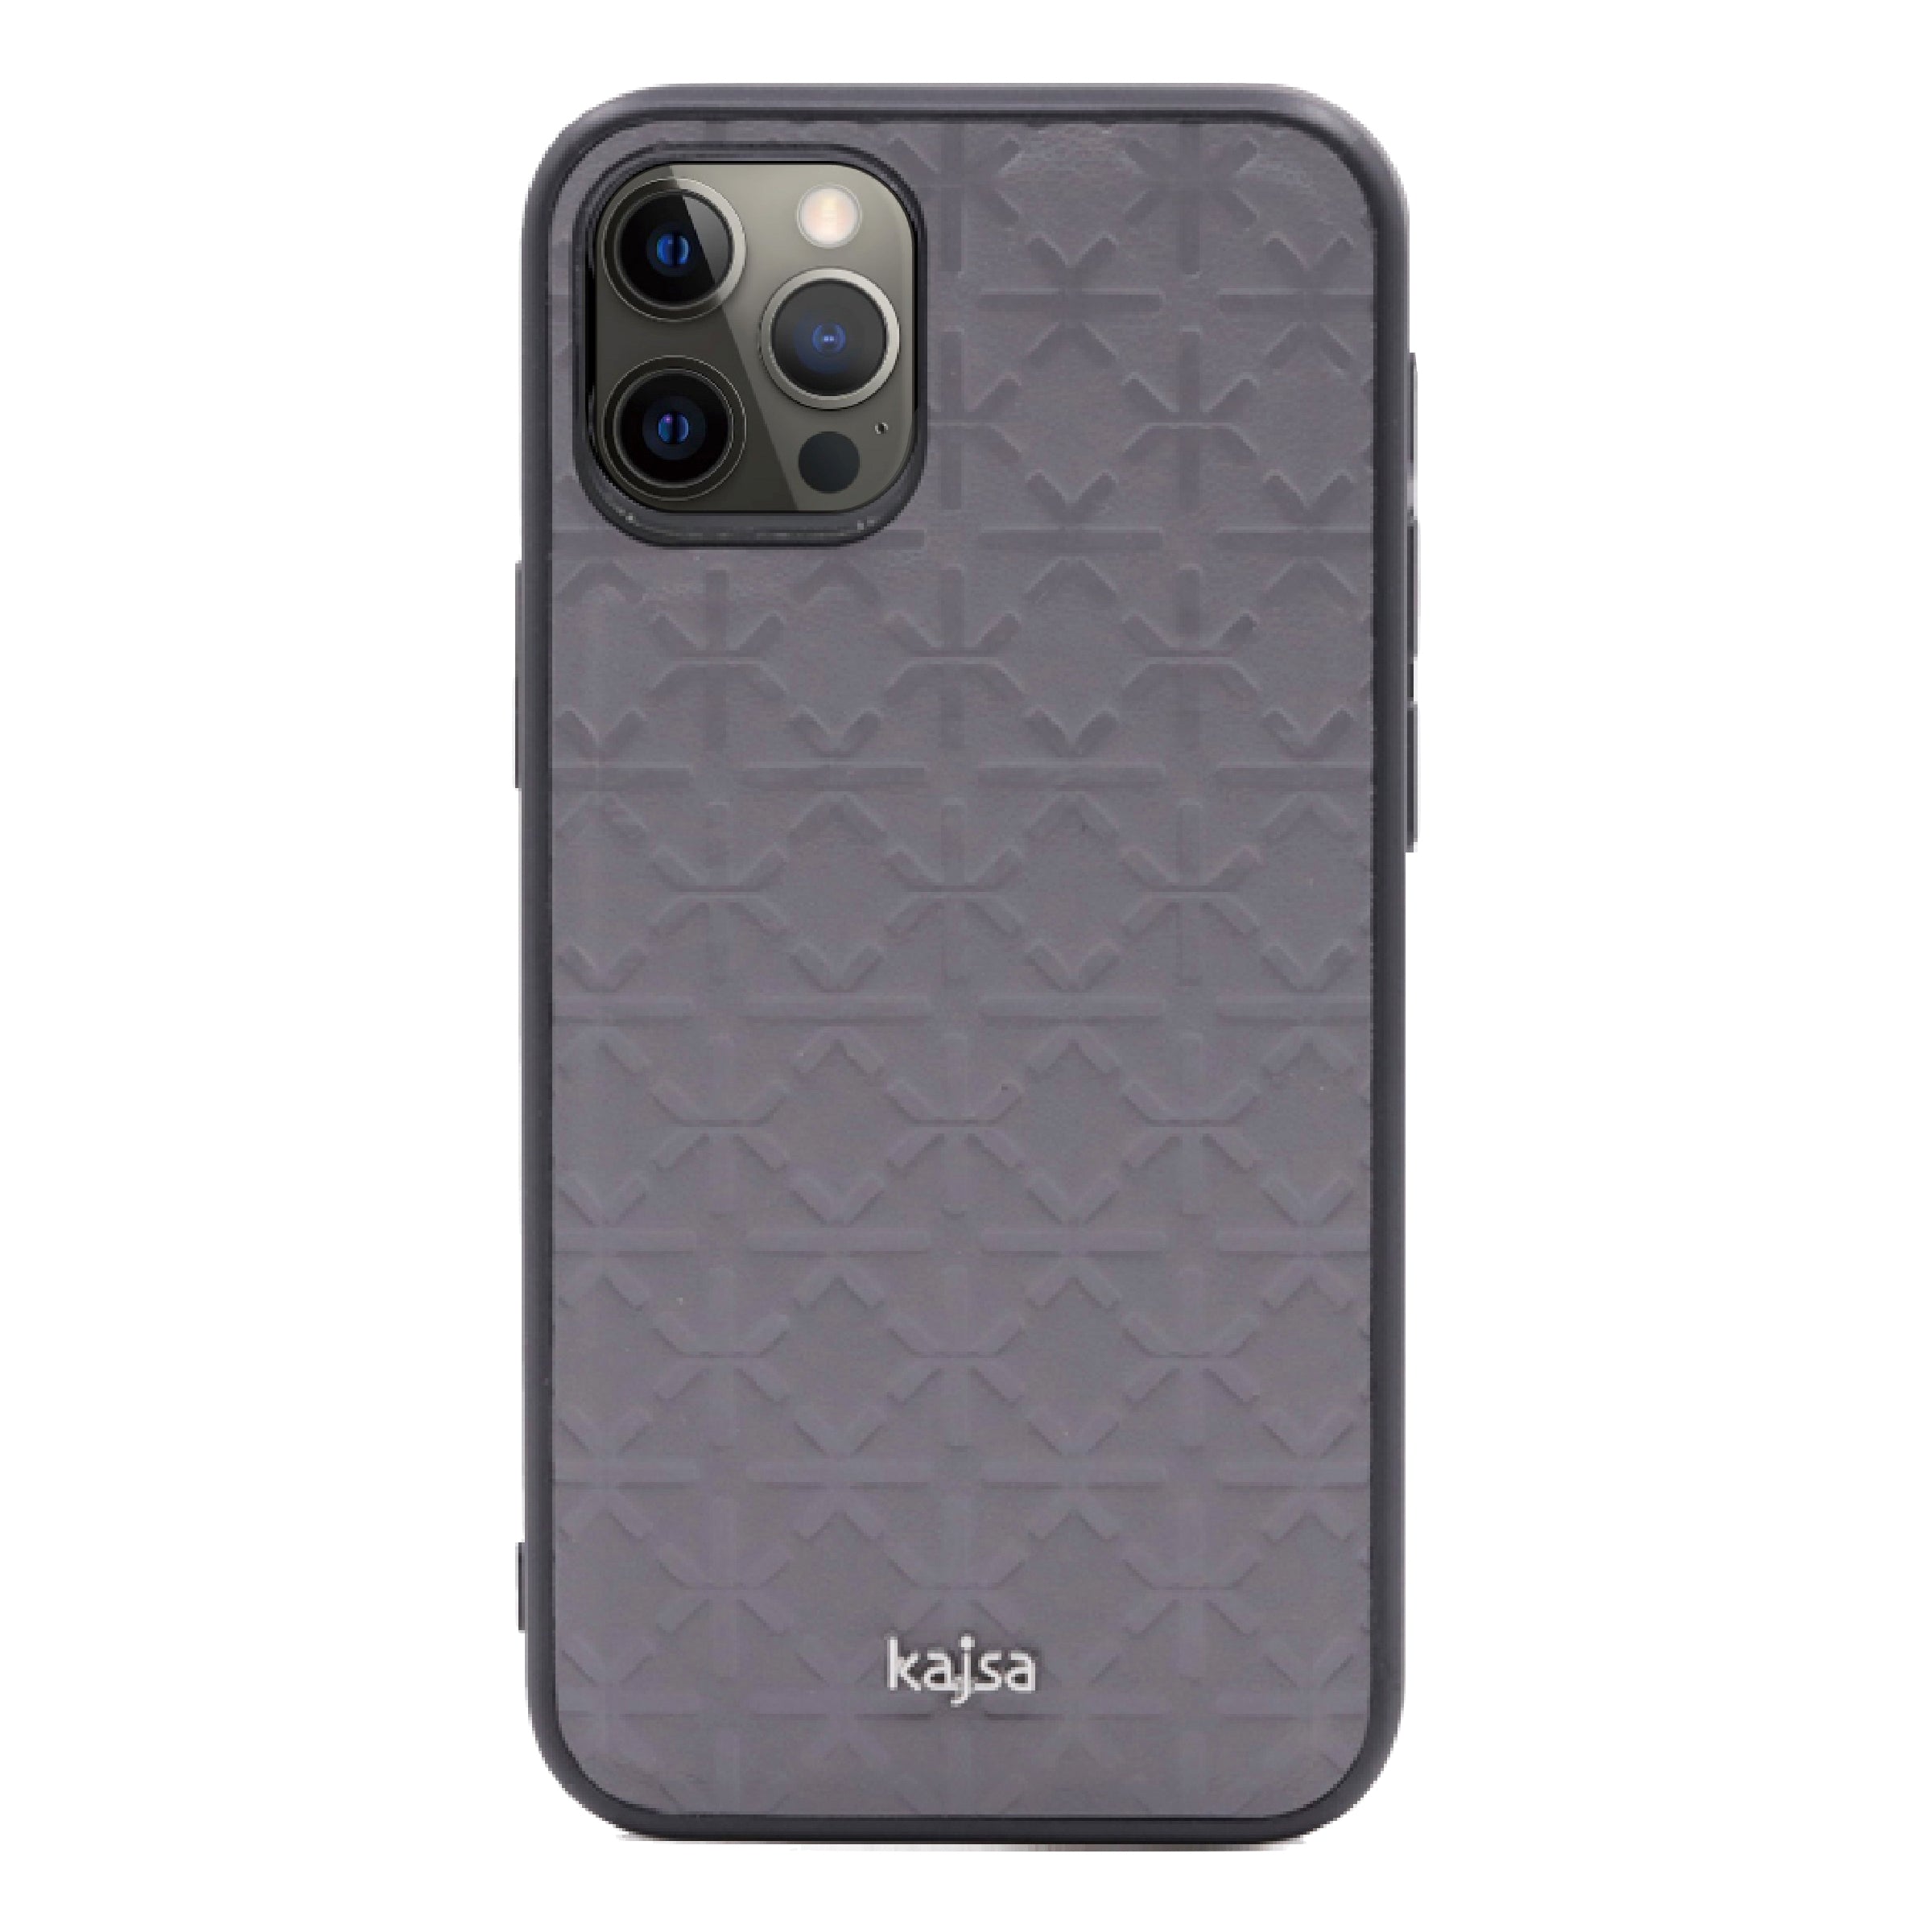 Neo Classic Collection - Mono K Back Case for iPhone 12-Phone Case- phone case - phone cases- phone cover- iphone cover- iphone case- iphone cases- leather case- leather cases- DIYCASE - custom case - leather cover - hand strap case - croco pattern case - snake pattern case - carbon fiber phone case - phone case brand - unique phone case - high quality - phone case brand - protective case - buy phone case hong kong - online buy phone case - iphone‎手機殼 - 客製化手機殼 - samsung ‎手機殼 - 香港手機殼 - 買電話殼